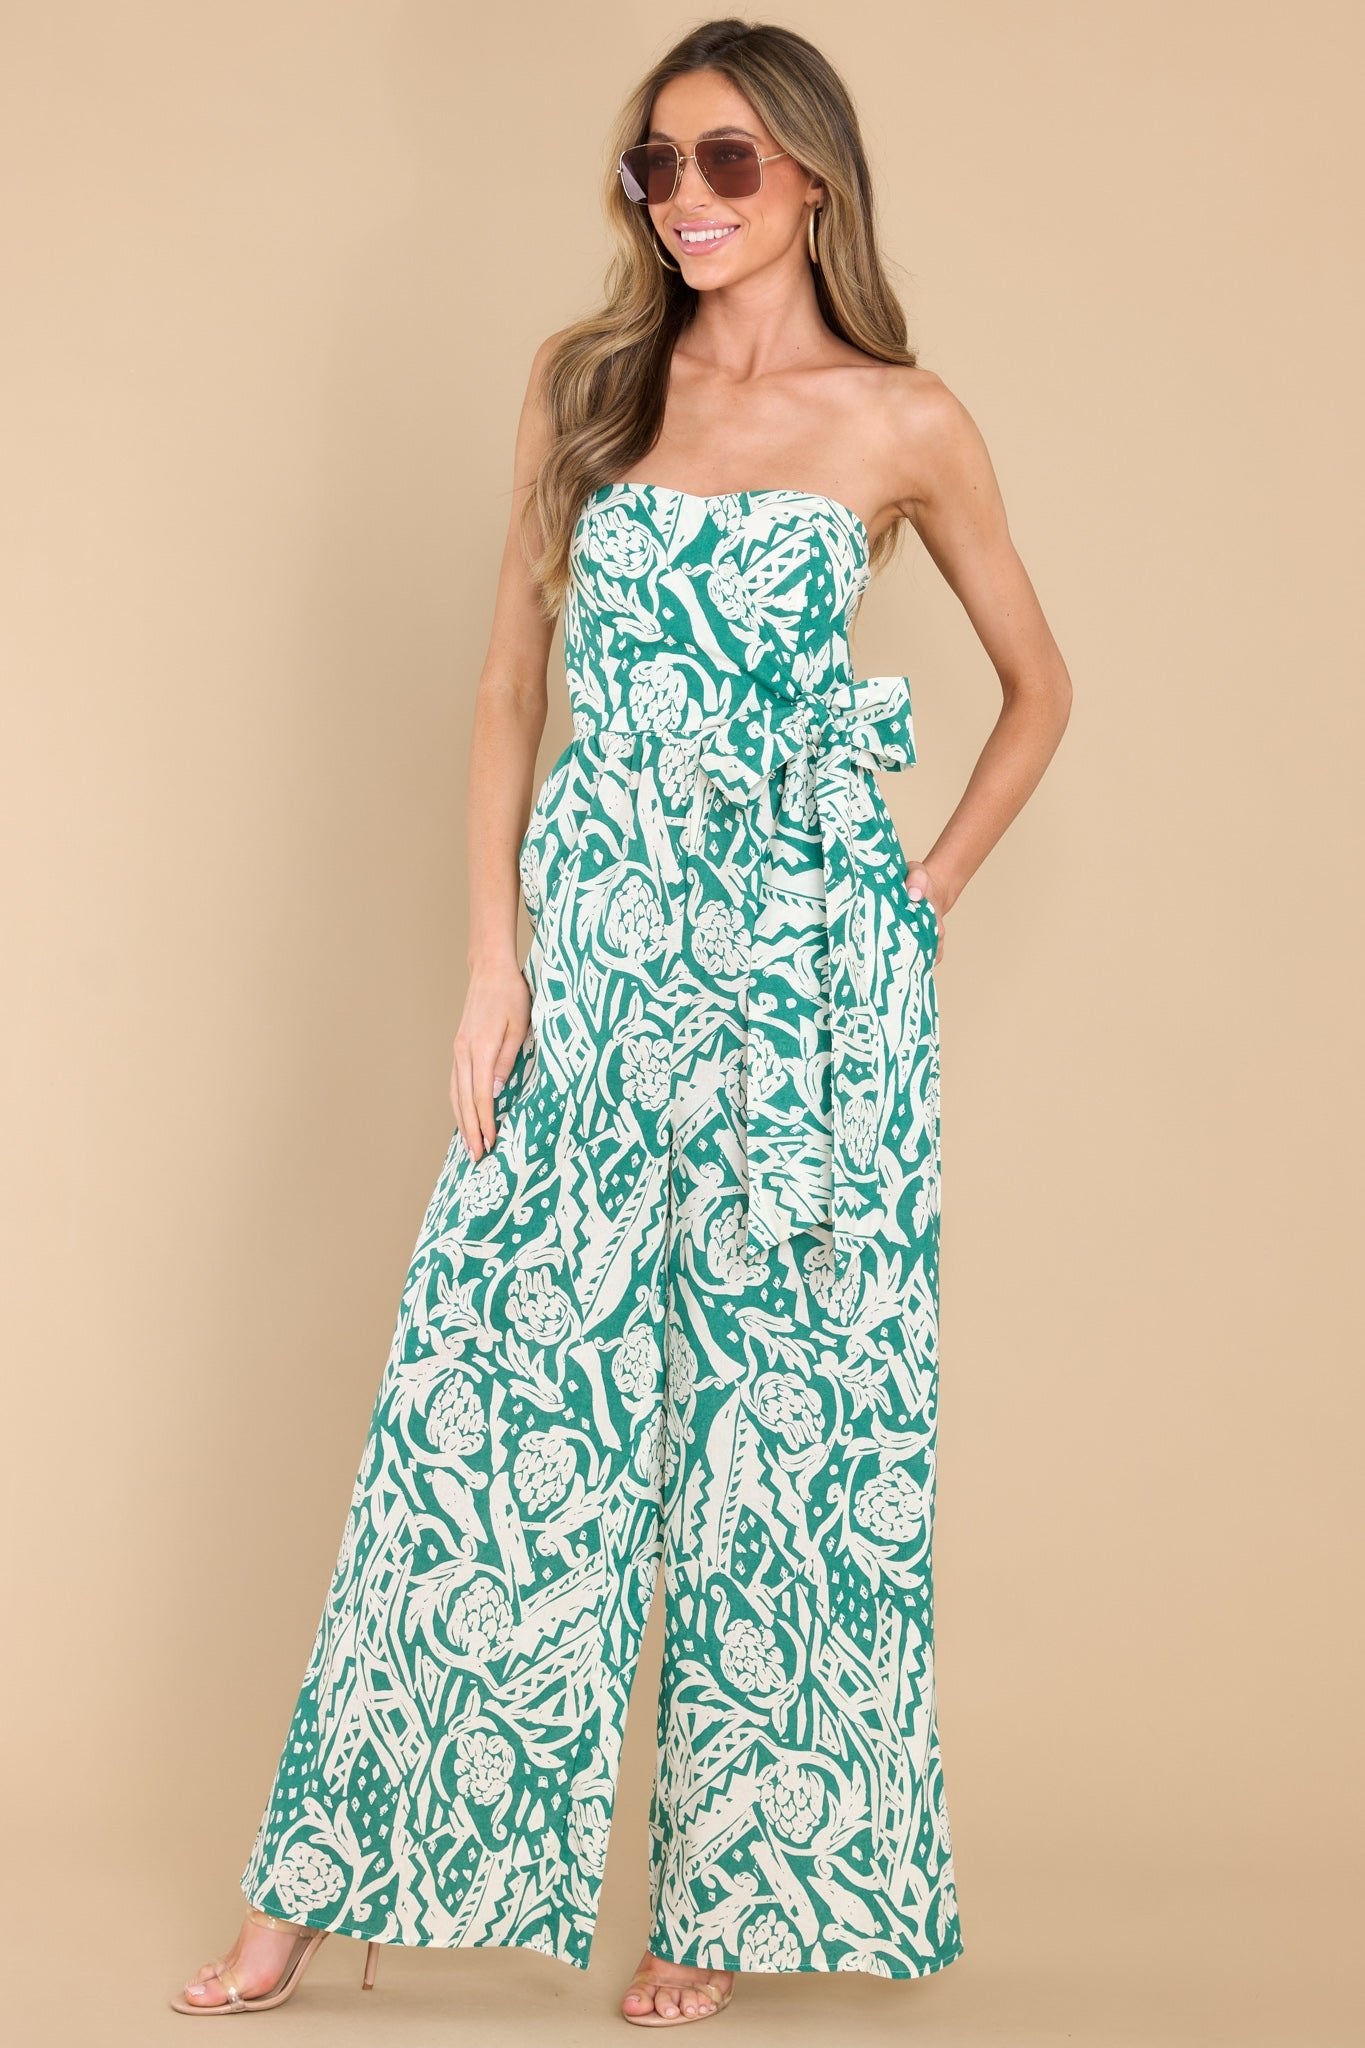 Remarkable Beauty Green Print Jumpsuit - Red Dress